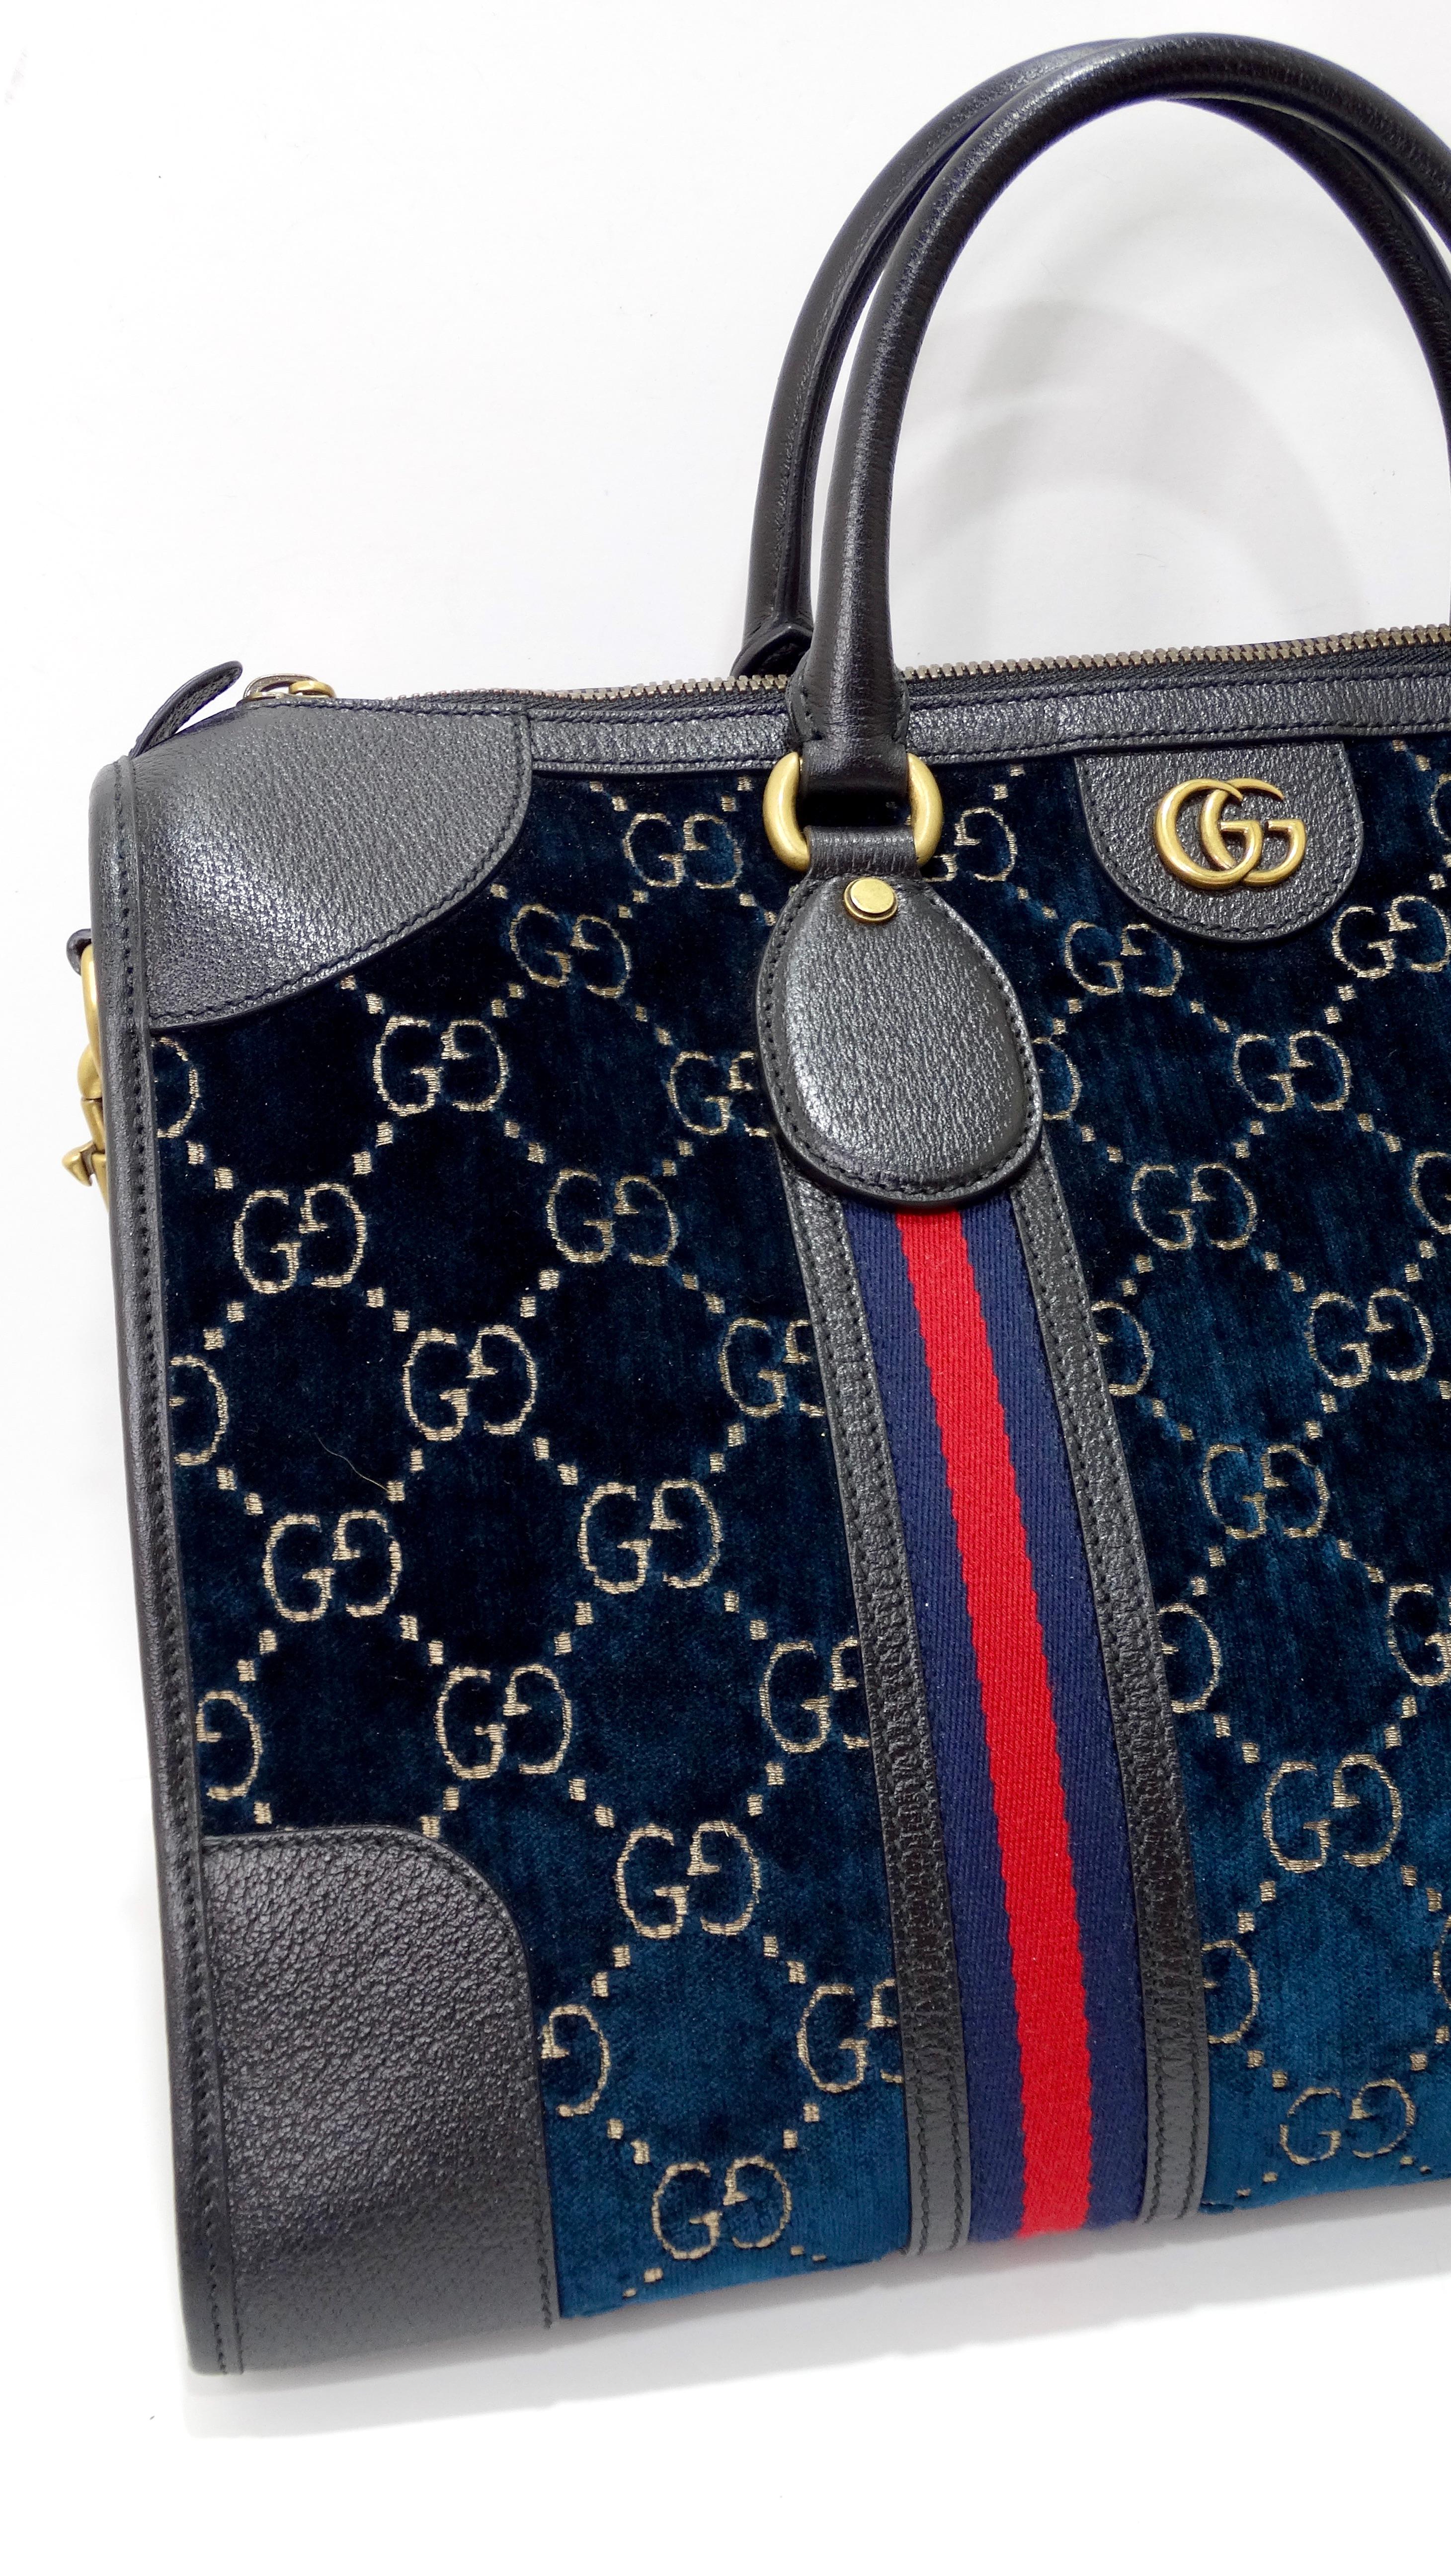 Go places in style with Gucci! Slot this dark blue medium GG velvet duffle bag into the overhead compartment and be on your way. Don't forget your passport! Make traveling feel luxurious no matter if you are in first class or coach. This Gucci